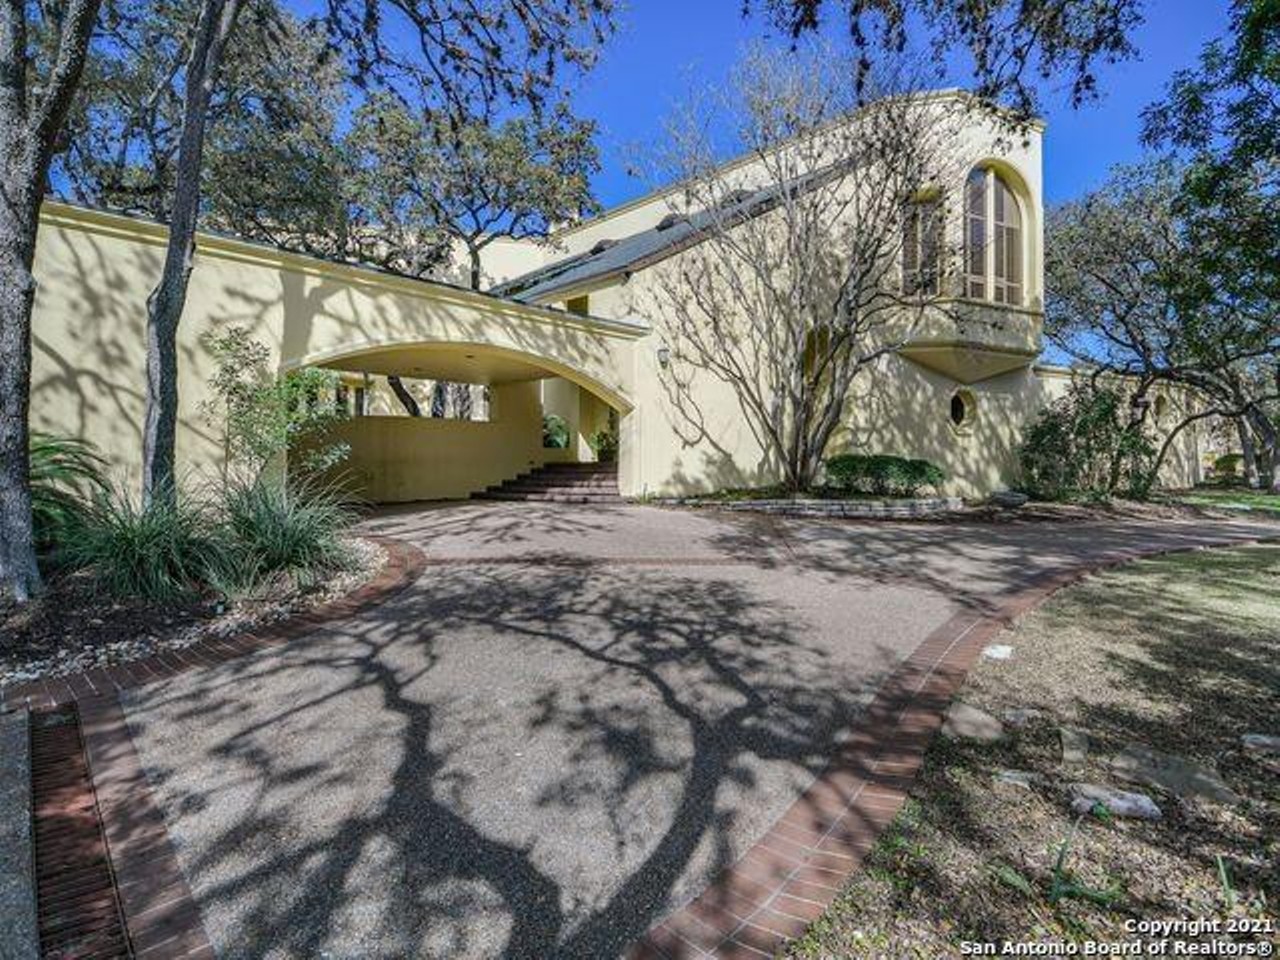 Sushi Zushi's owner is selling this $1.2 million totally '80s mansion in North San Antonio